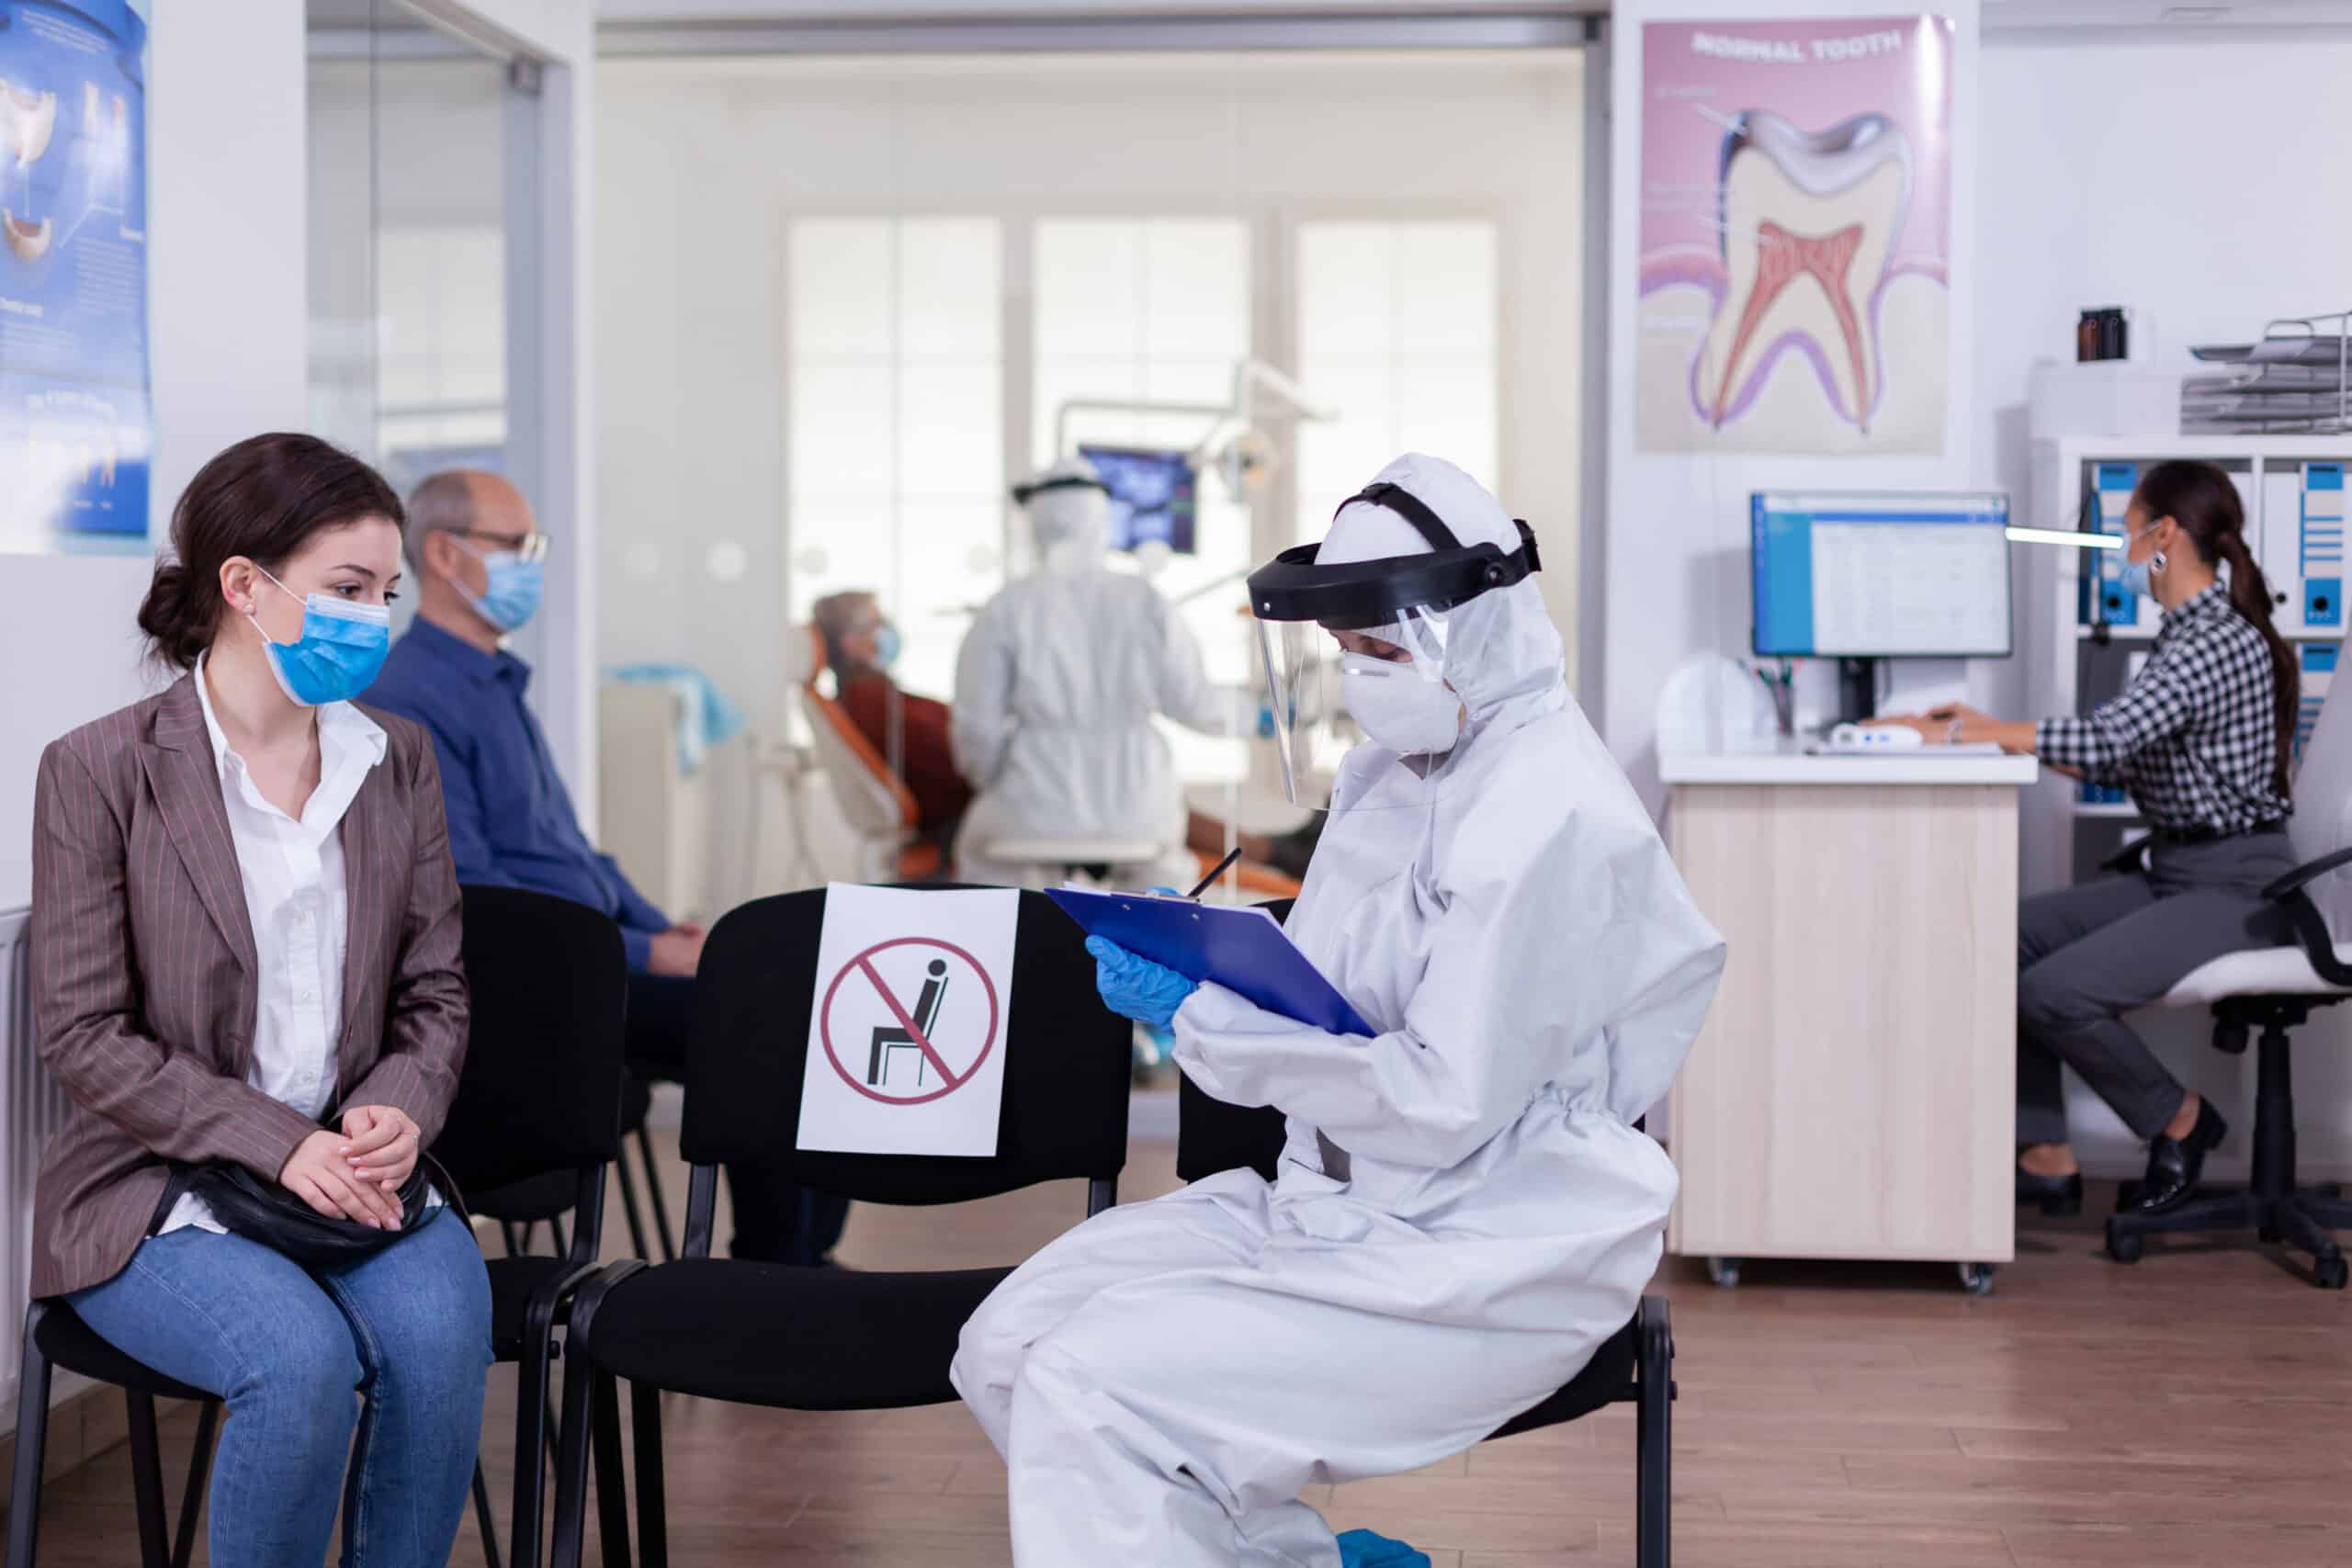 Dentist assistant with ppe equipment talking with patient before consultation during coronavirus epidemic sitting on chairs in waiting area keeping distance